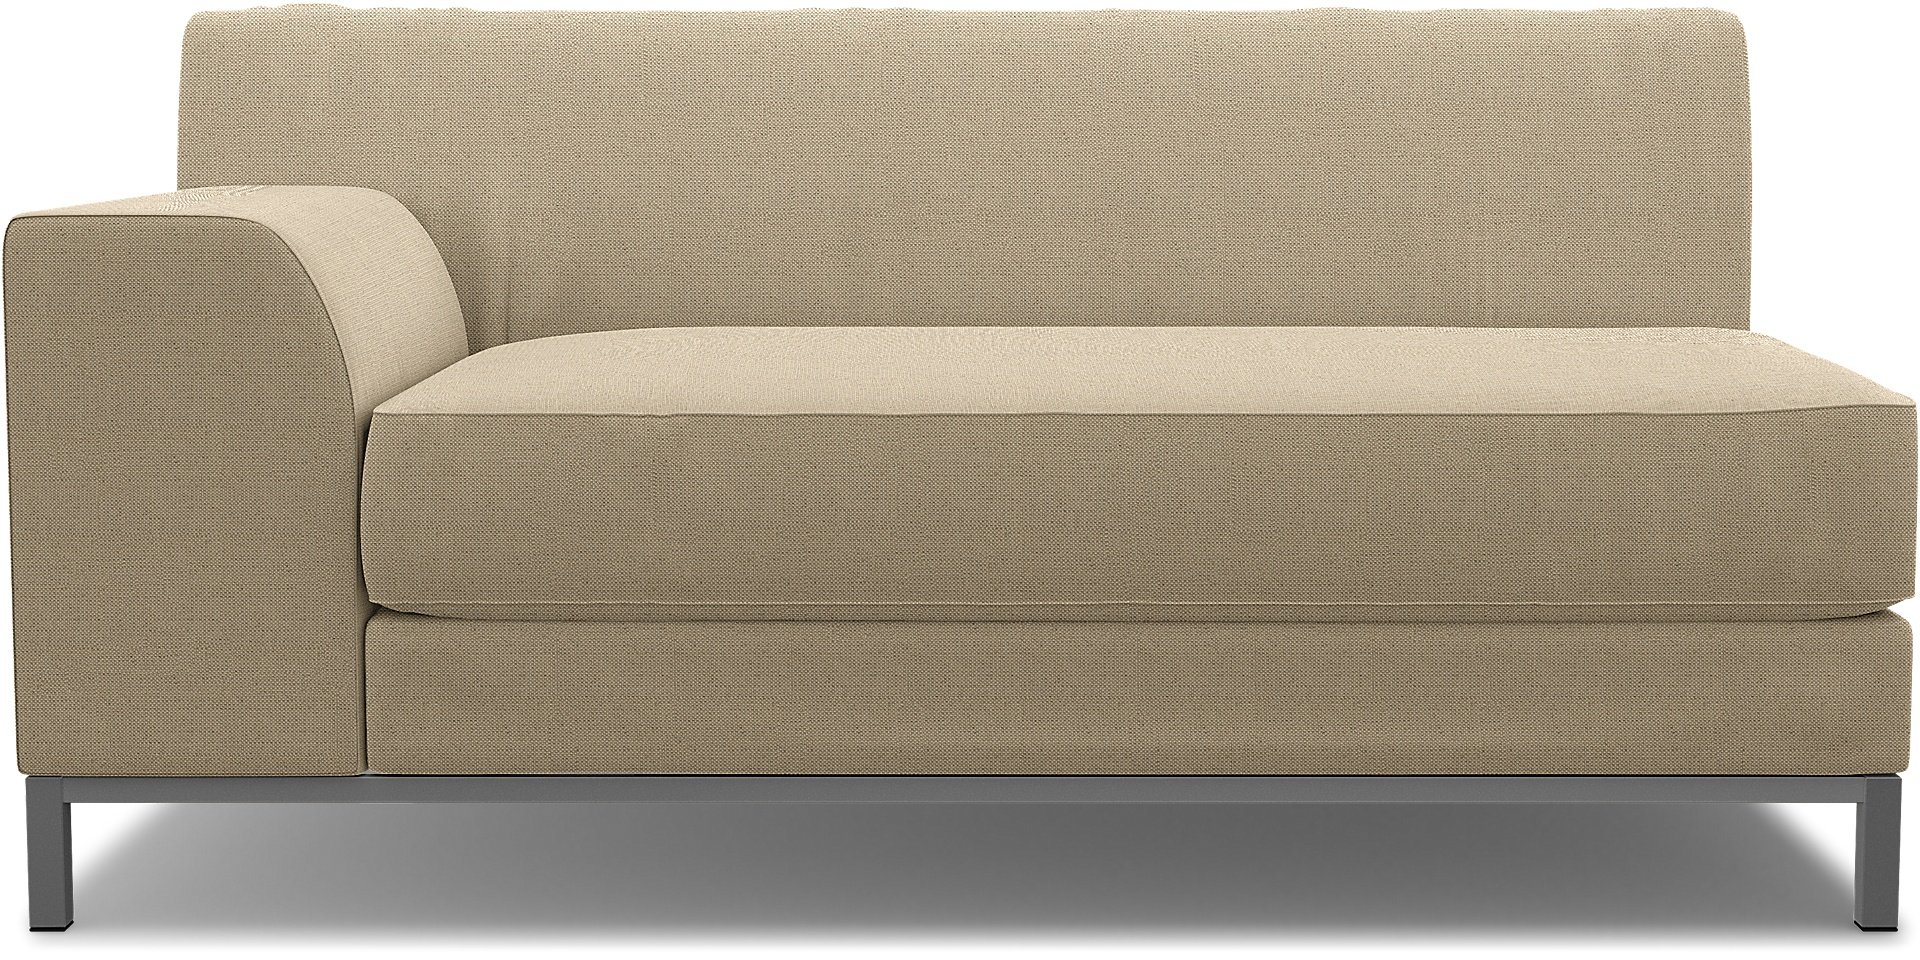 IKEA - Kramfors 2 Seater Sofa with Left Arm Cover, Unbleached, Linen - Bemz